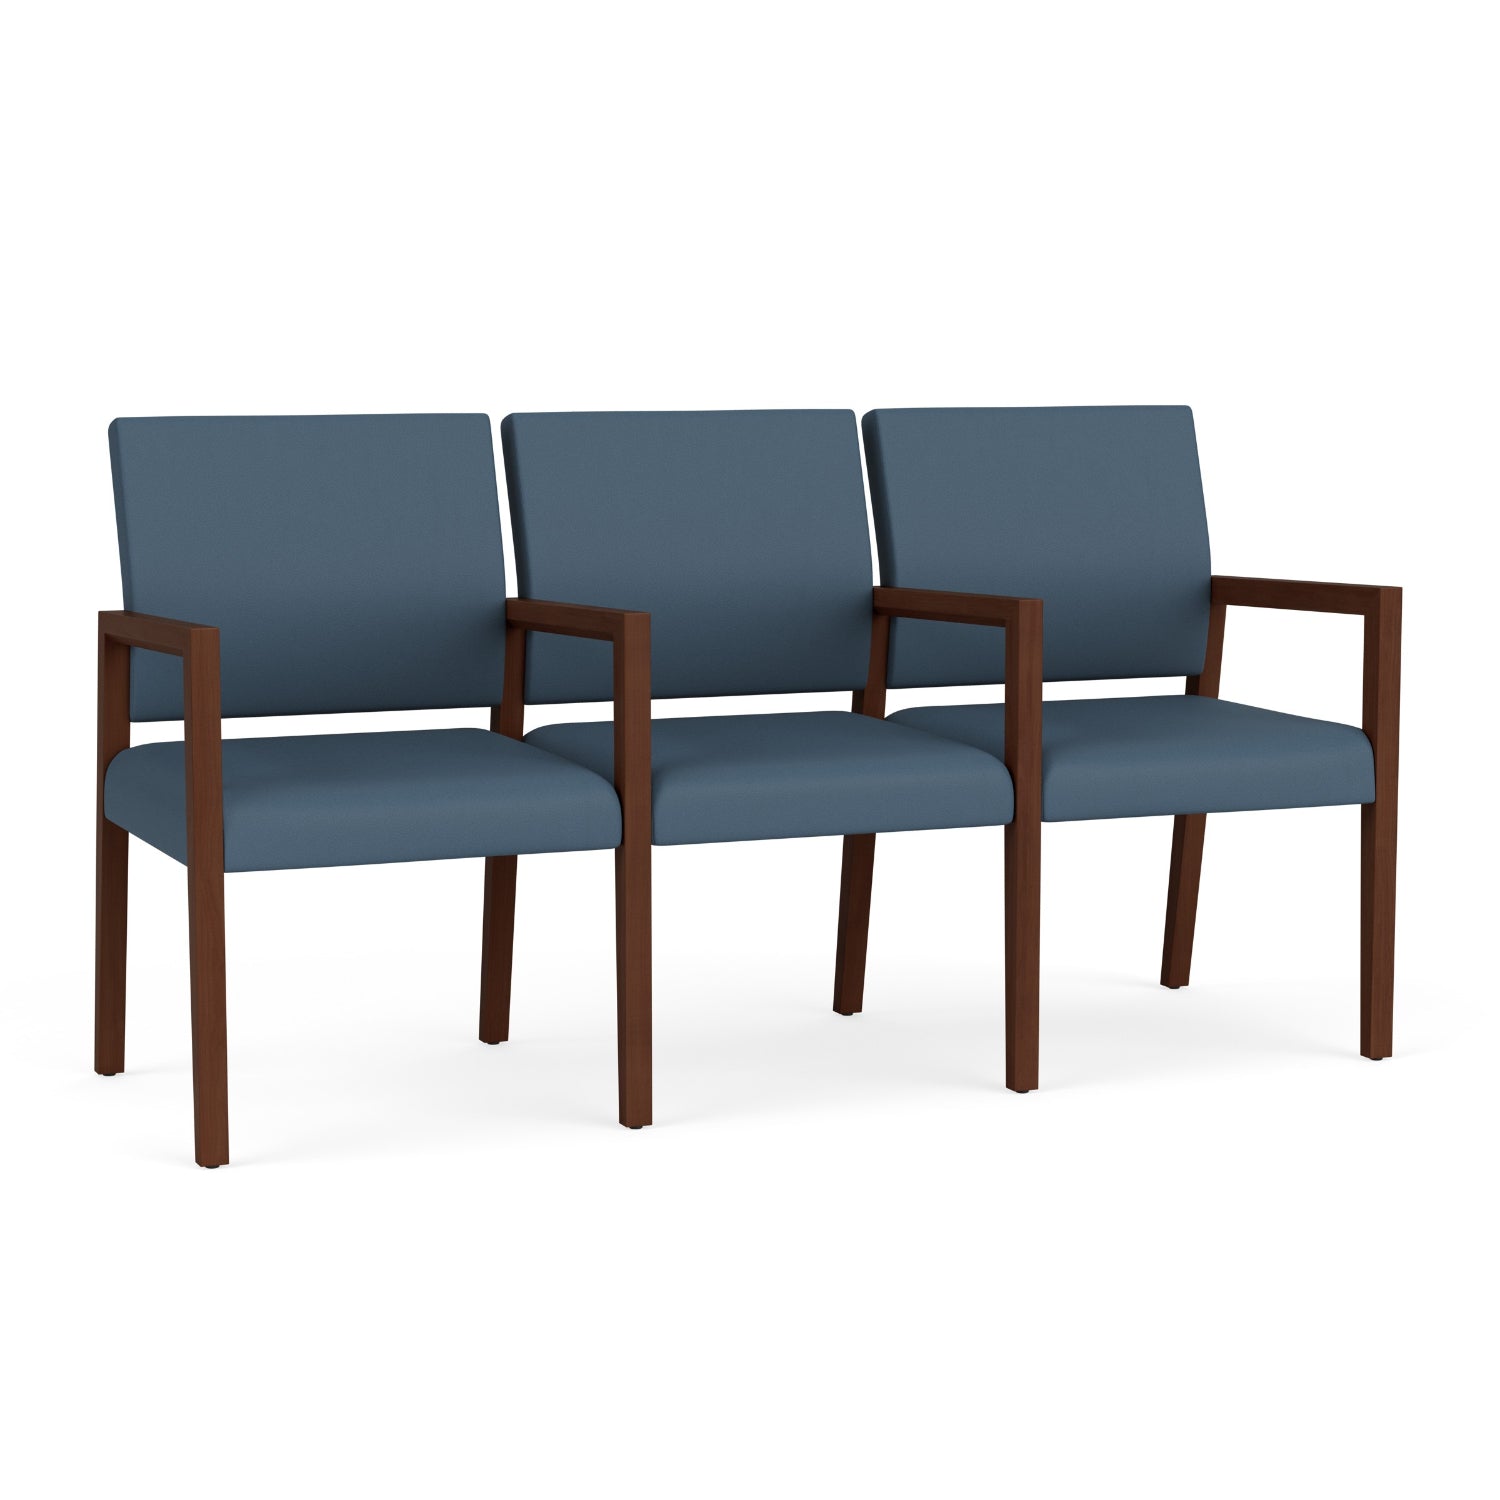 Brooklyn Collection Reception Seating, 3 Seats with Center Arms, Standard Vinyl Upholstery, FREE SHIPPING